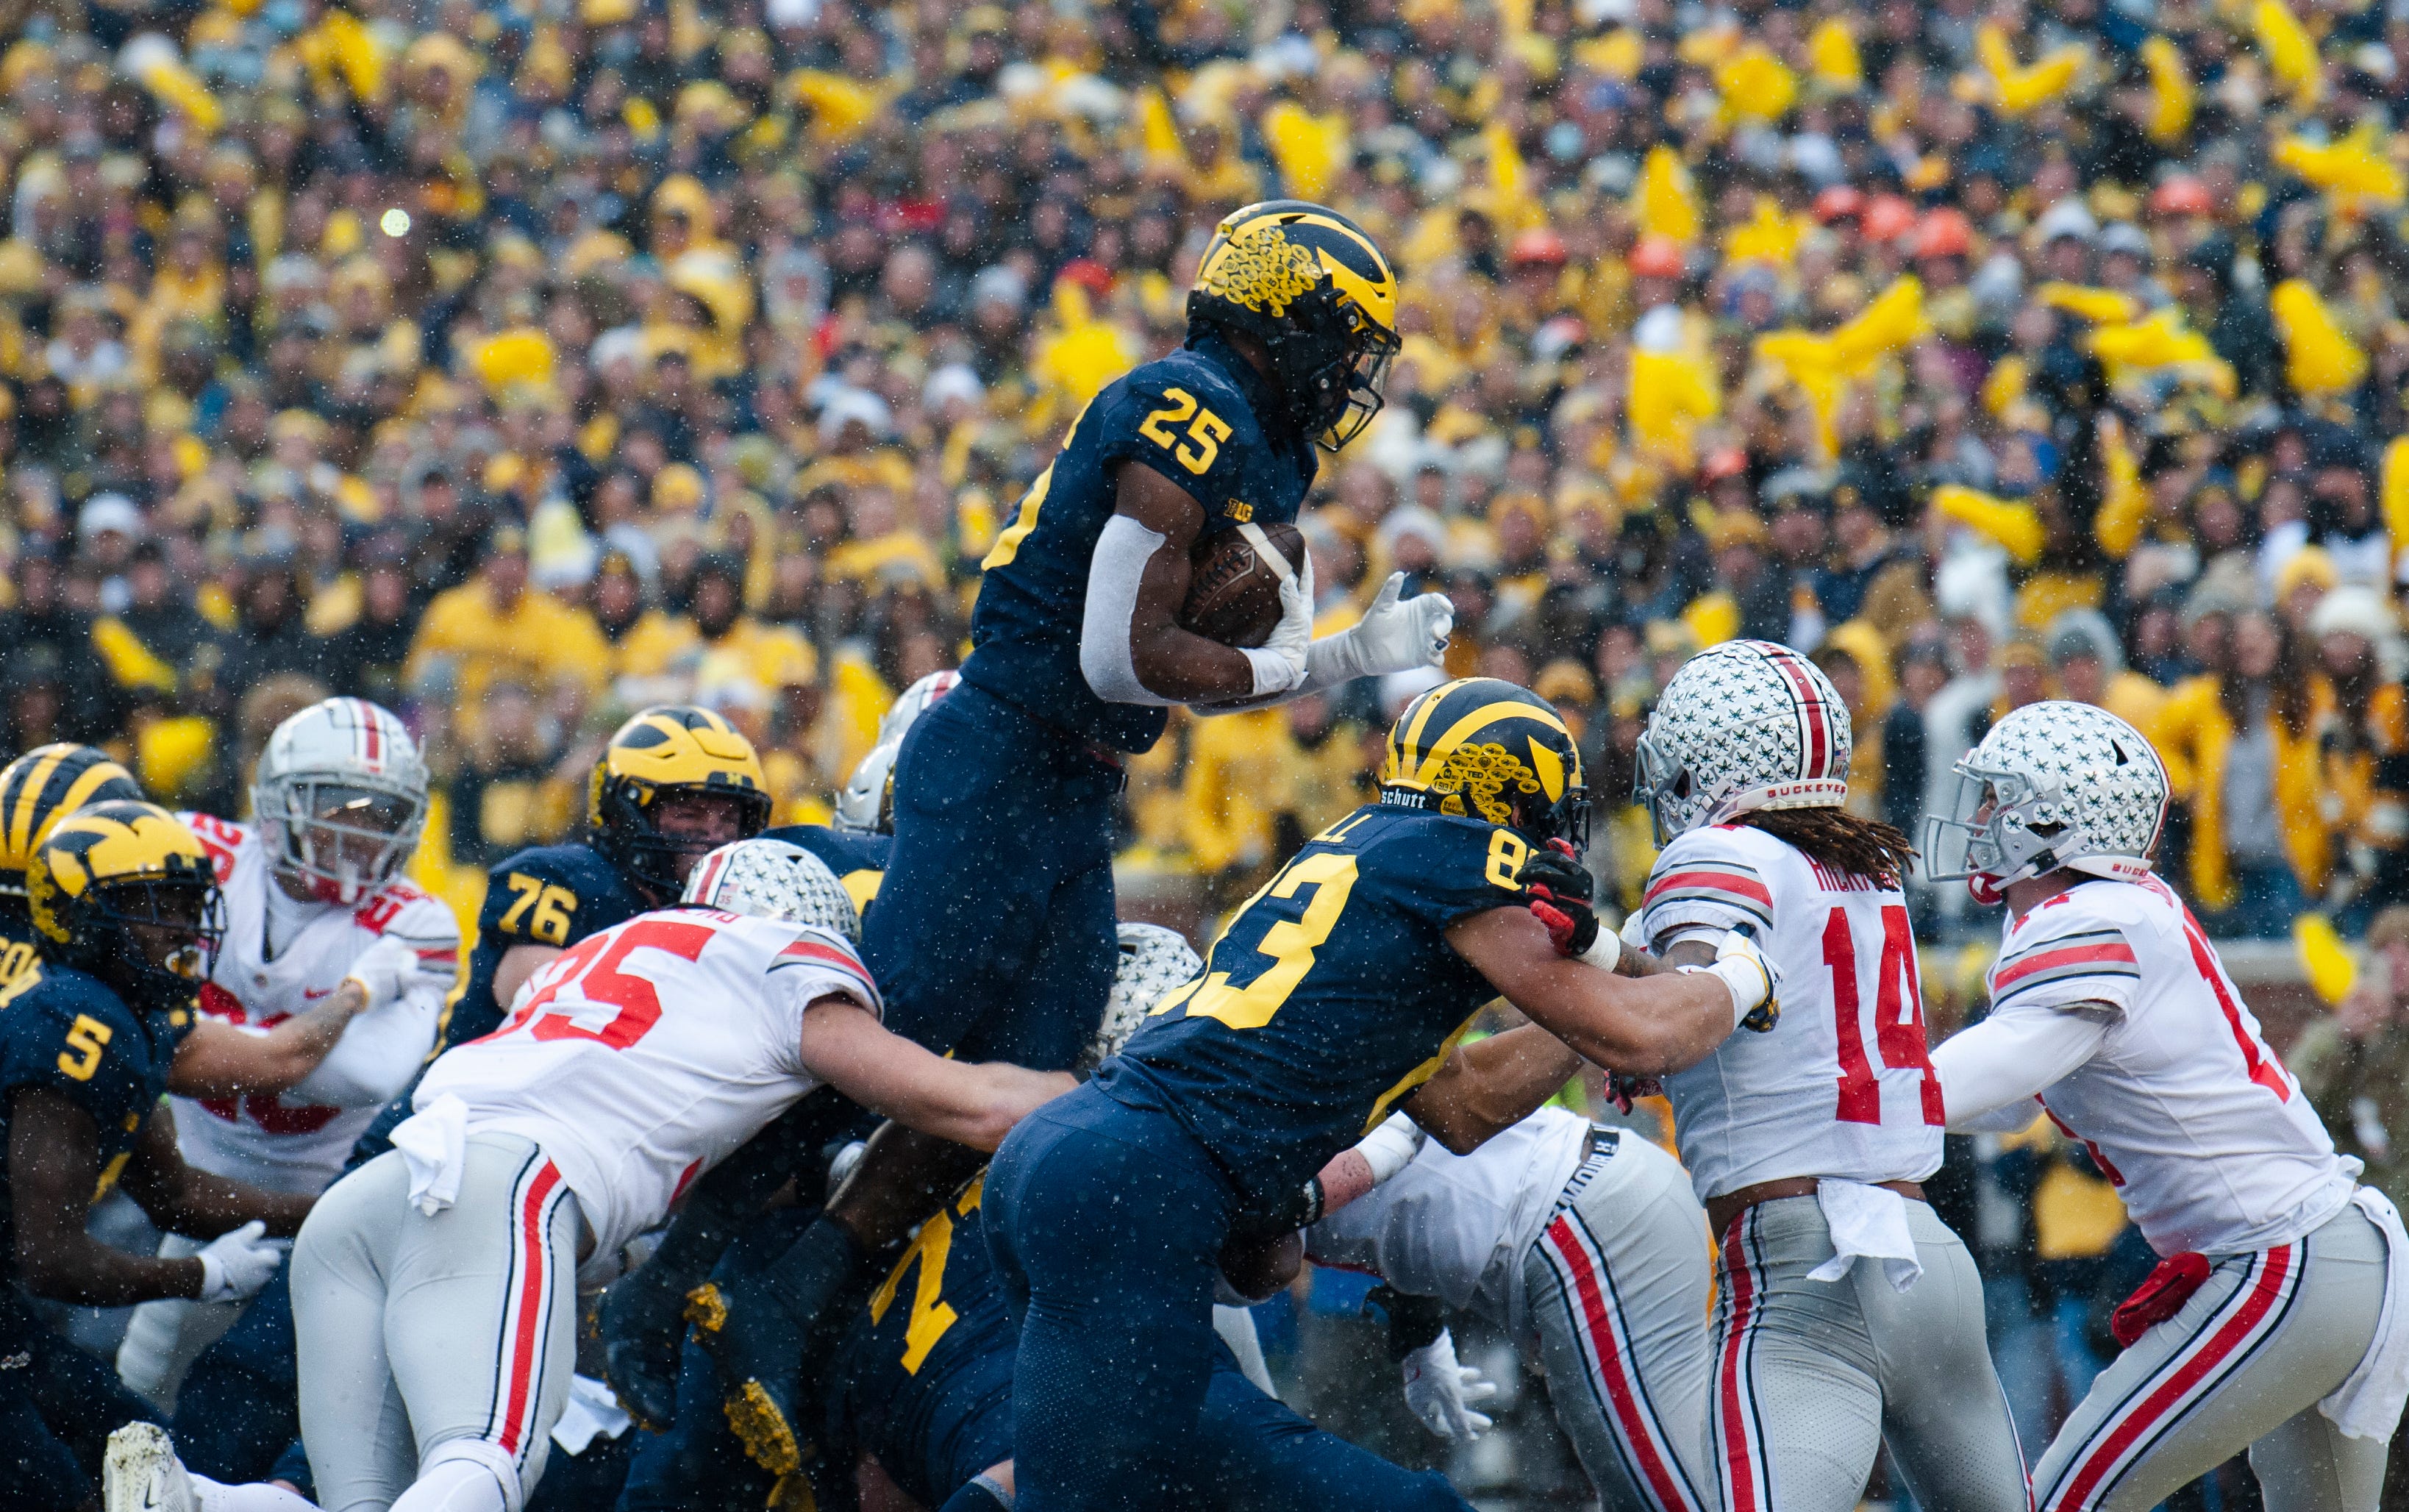 Watch: Highlights from the Michigan-Ohio State showdown